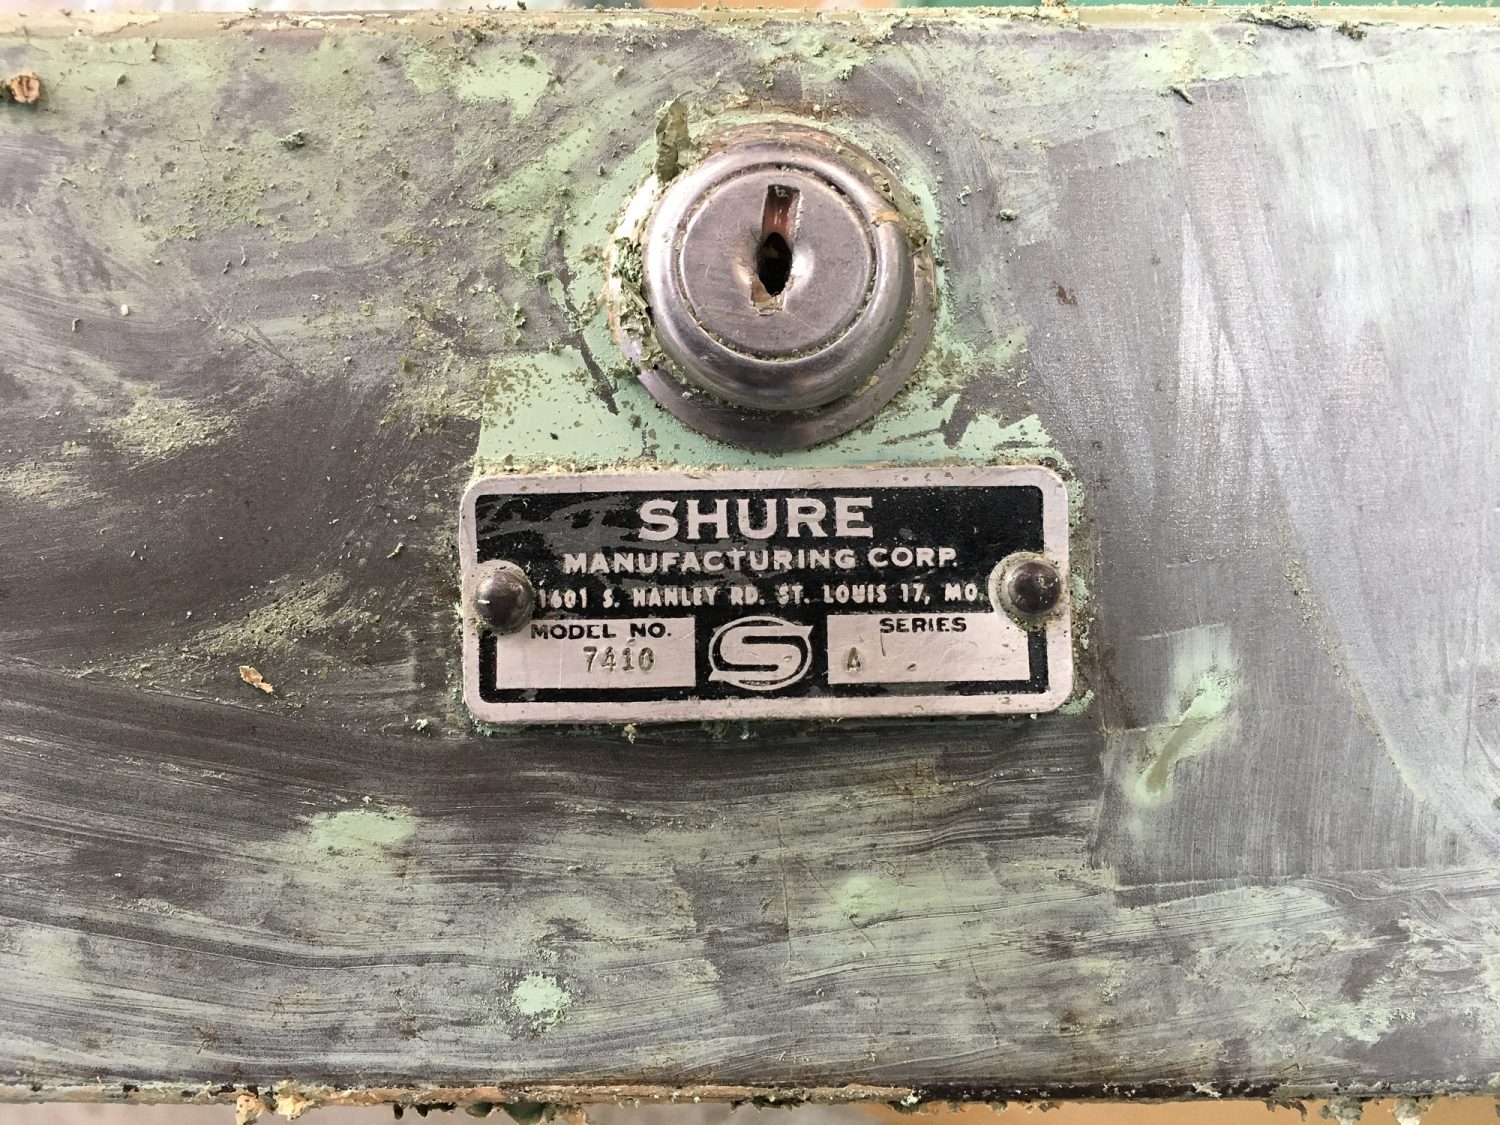 mid century steel tanker desk, displaying the manufacturers tag, Shure Manufacturing Corp.